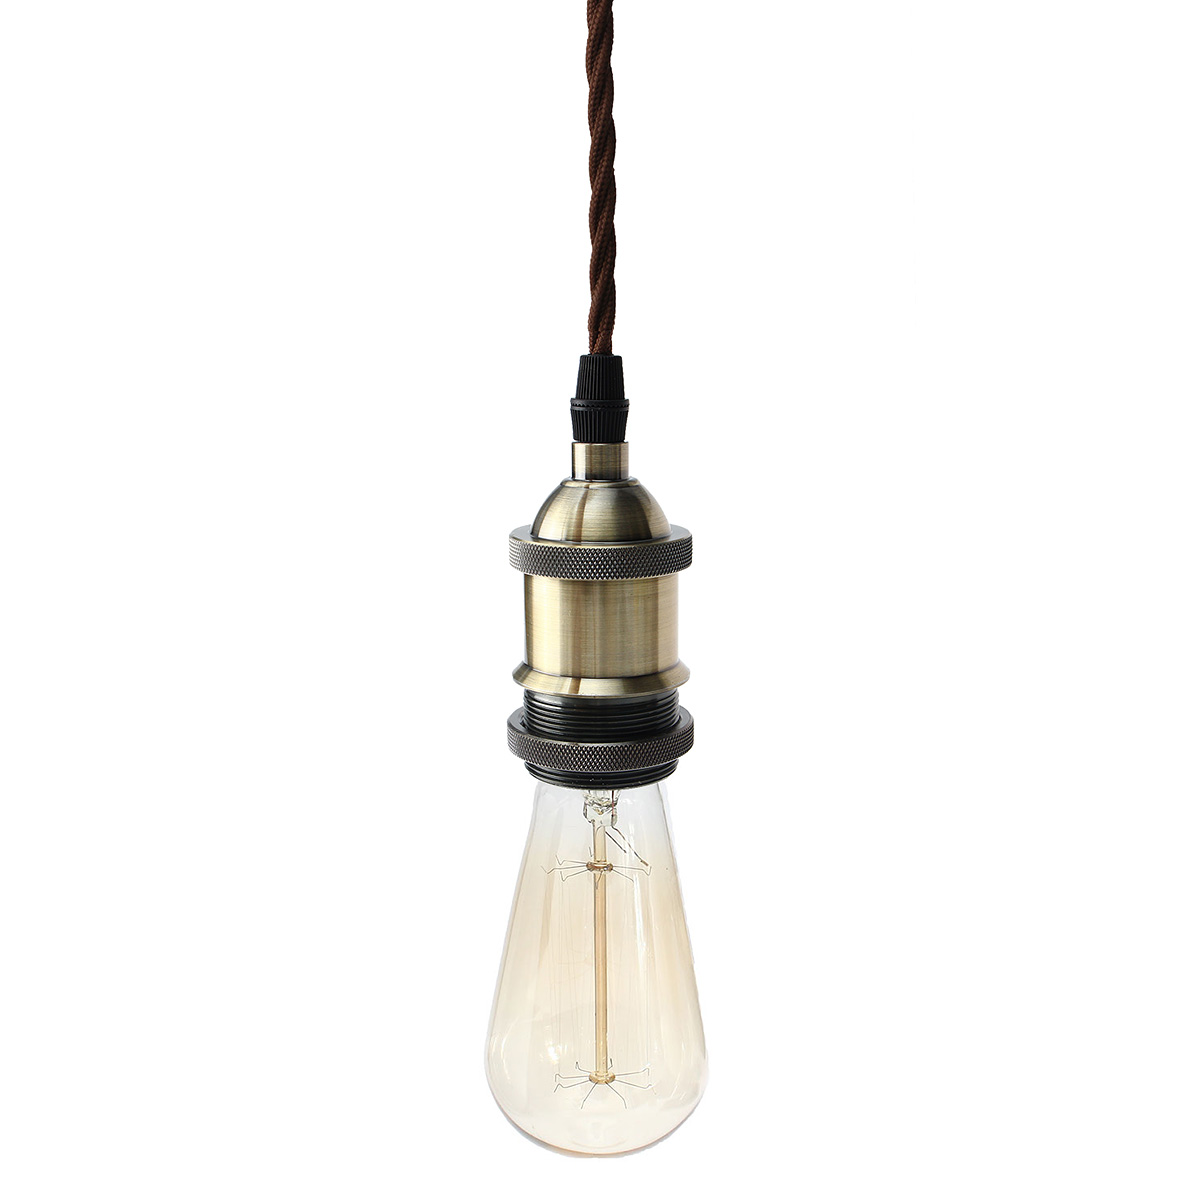 Find KINGSO 110V 220V 600W Vintage Lamp Holder Ceiling Canopy and Copper Socket with 2M Wire for Sale on Gipsybee.com with cryptocurrencies